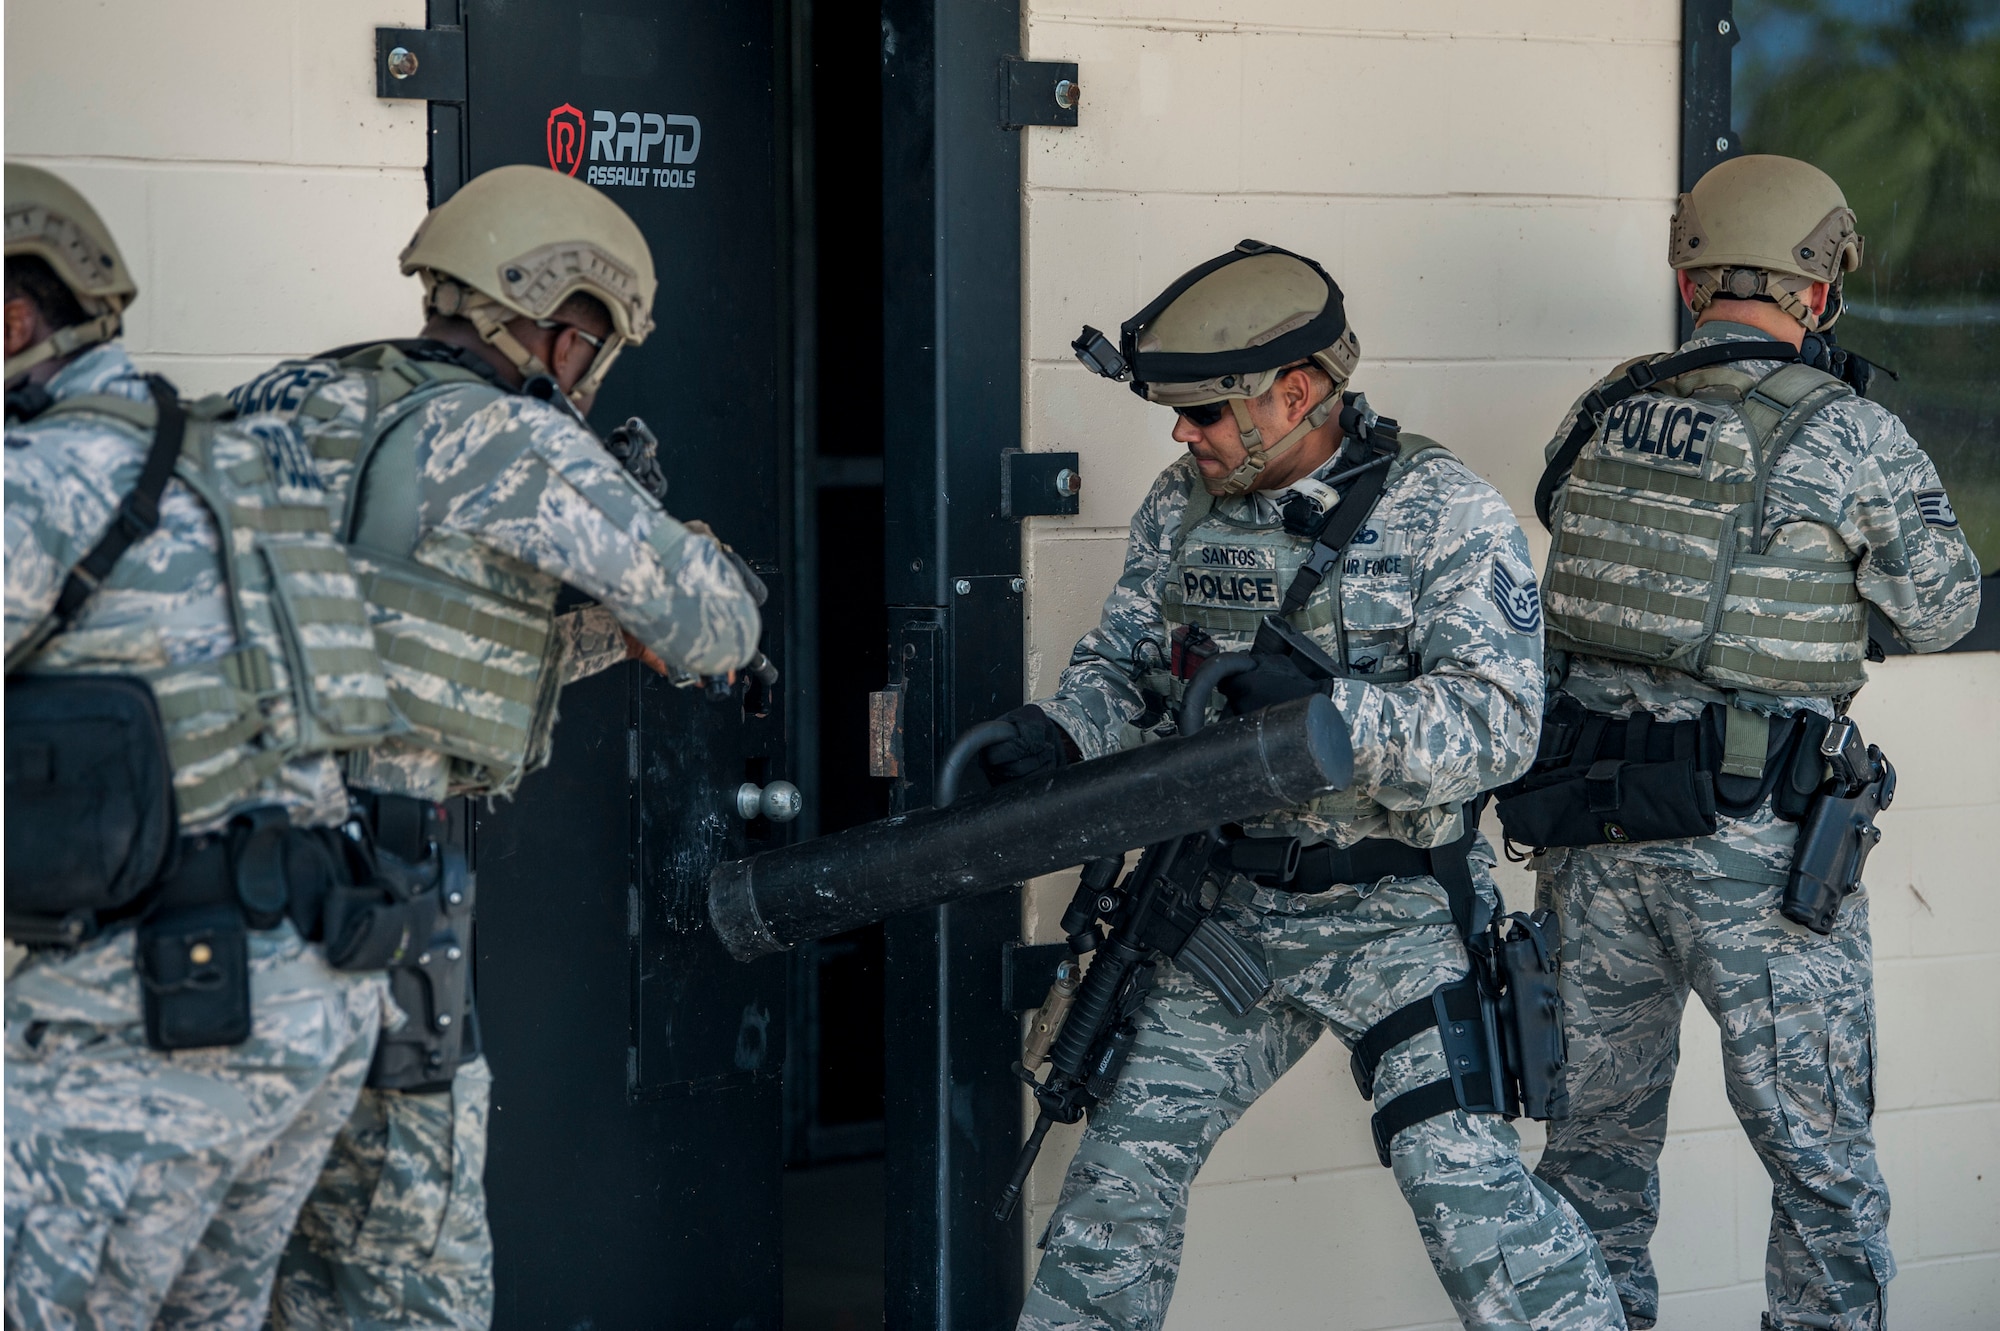 Members of the 6th Security Forces emergency services team (EST) breach an assault door during a training scenario at MacDill Air Force Base, Fla., Aug. 23, 2018.